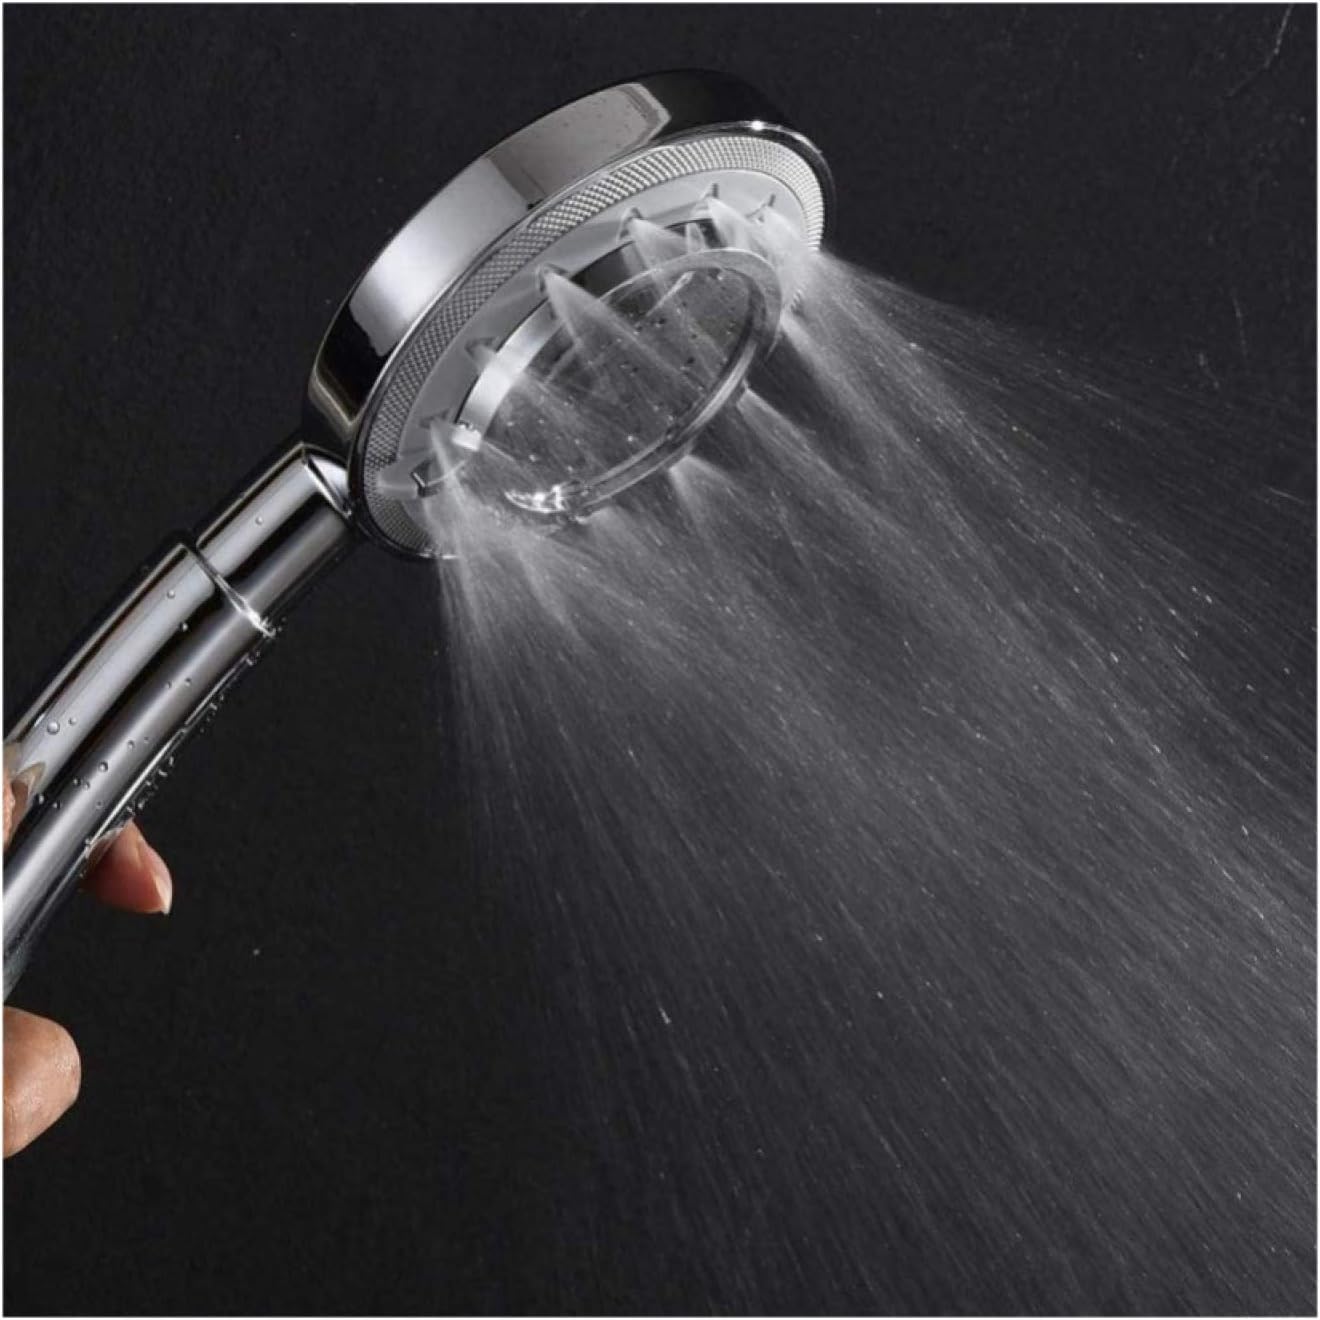 You can buy shower heads with low consumption in Israel on the bulletin board